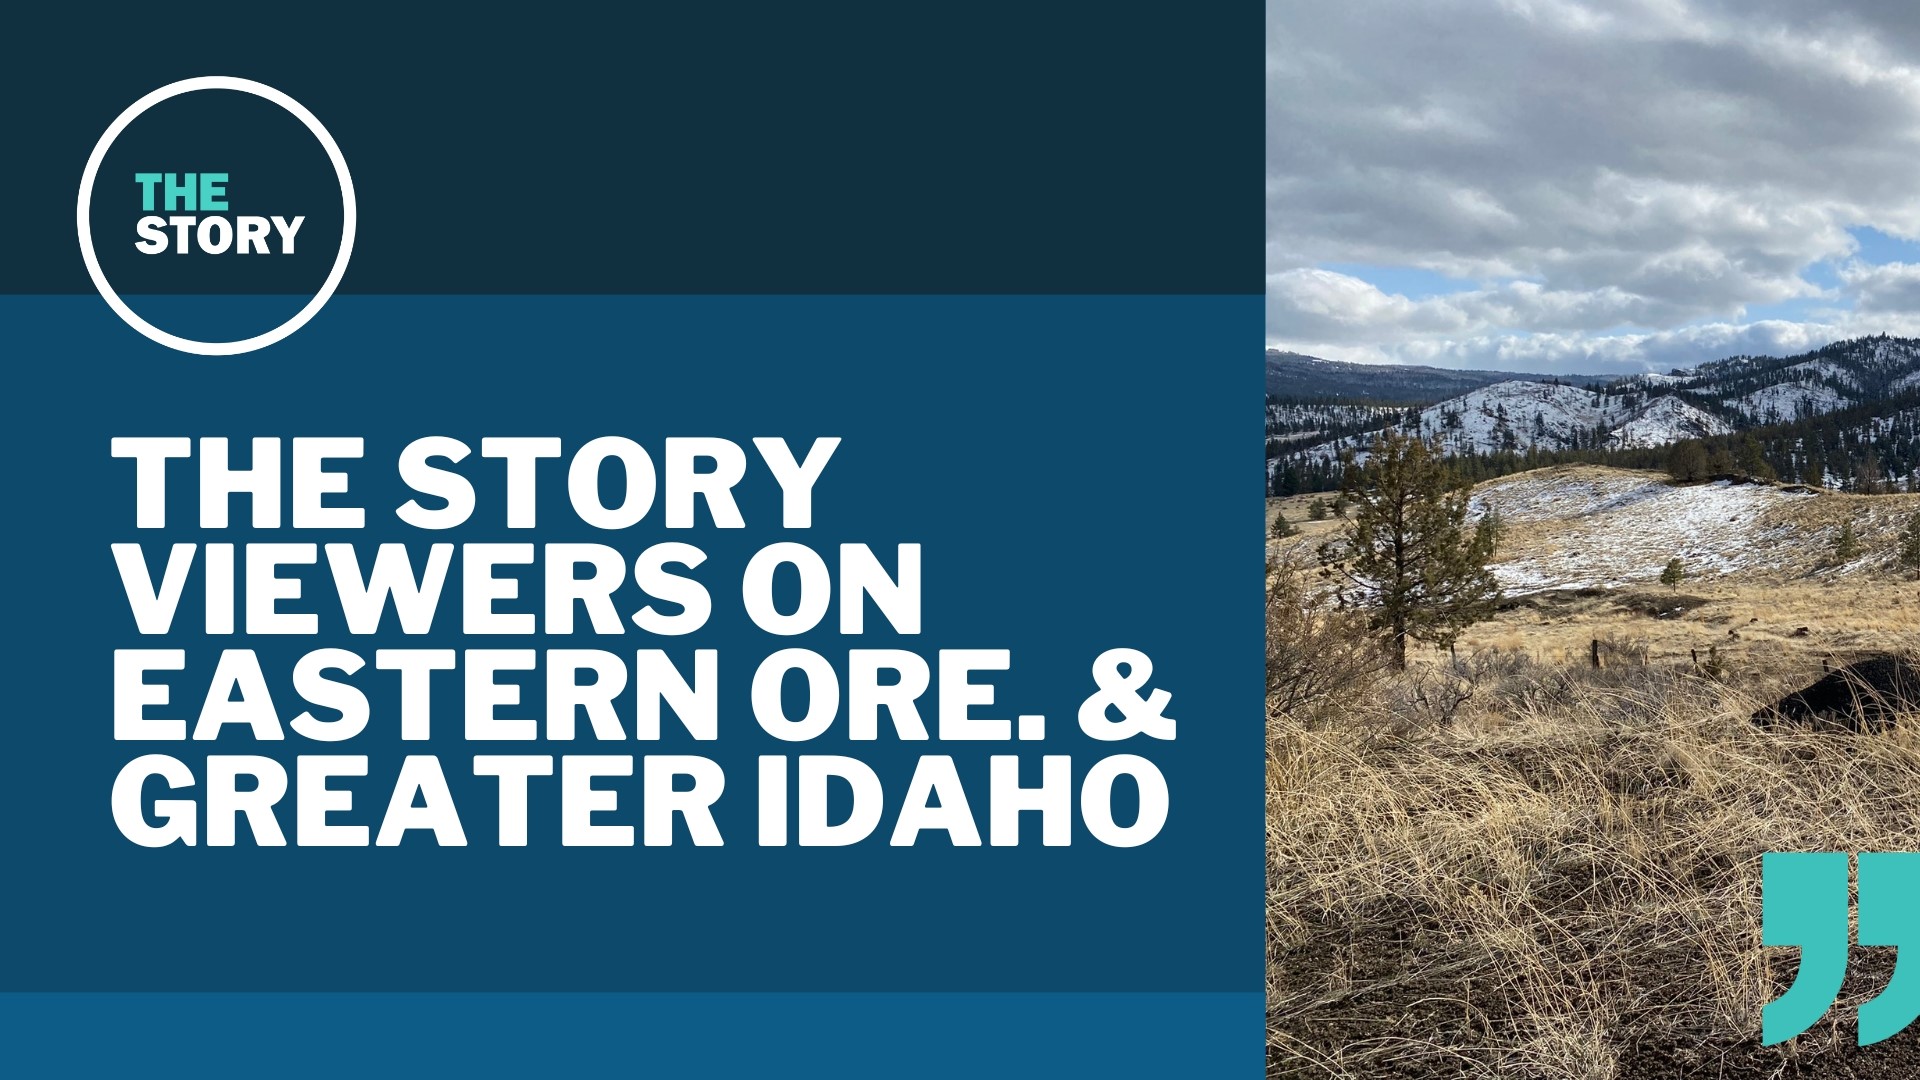 We’ve received opinions from all across the ideological spectrum, including some pretty thoughtful insights. Here’s the latest on our eastern Oregon series.